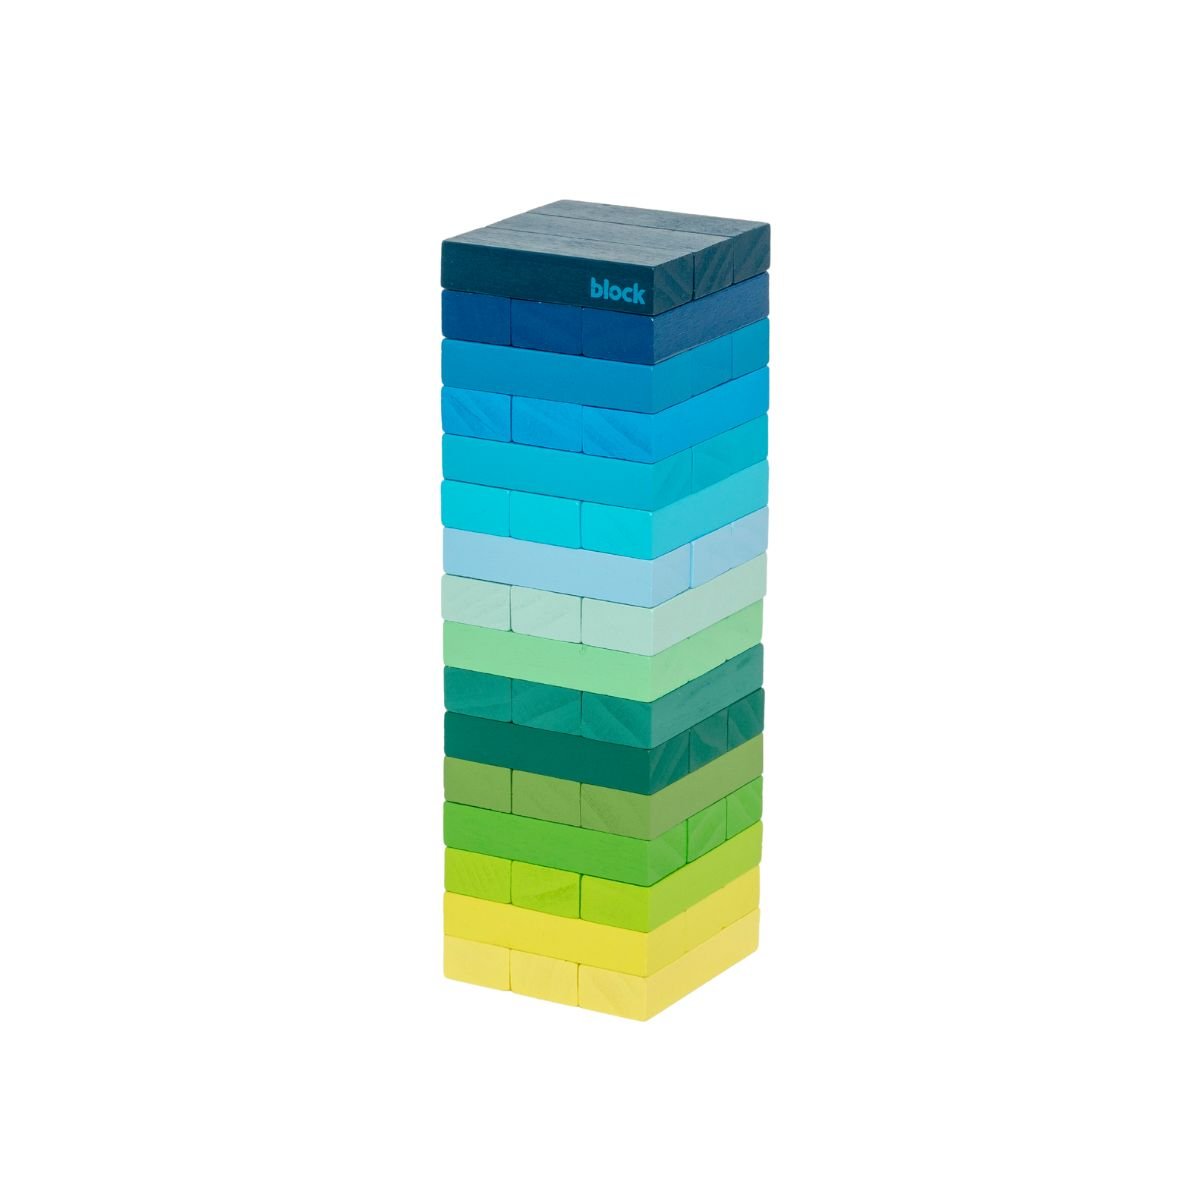 Gradient Tumble Tower Game - Cool - Life of Riley